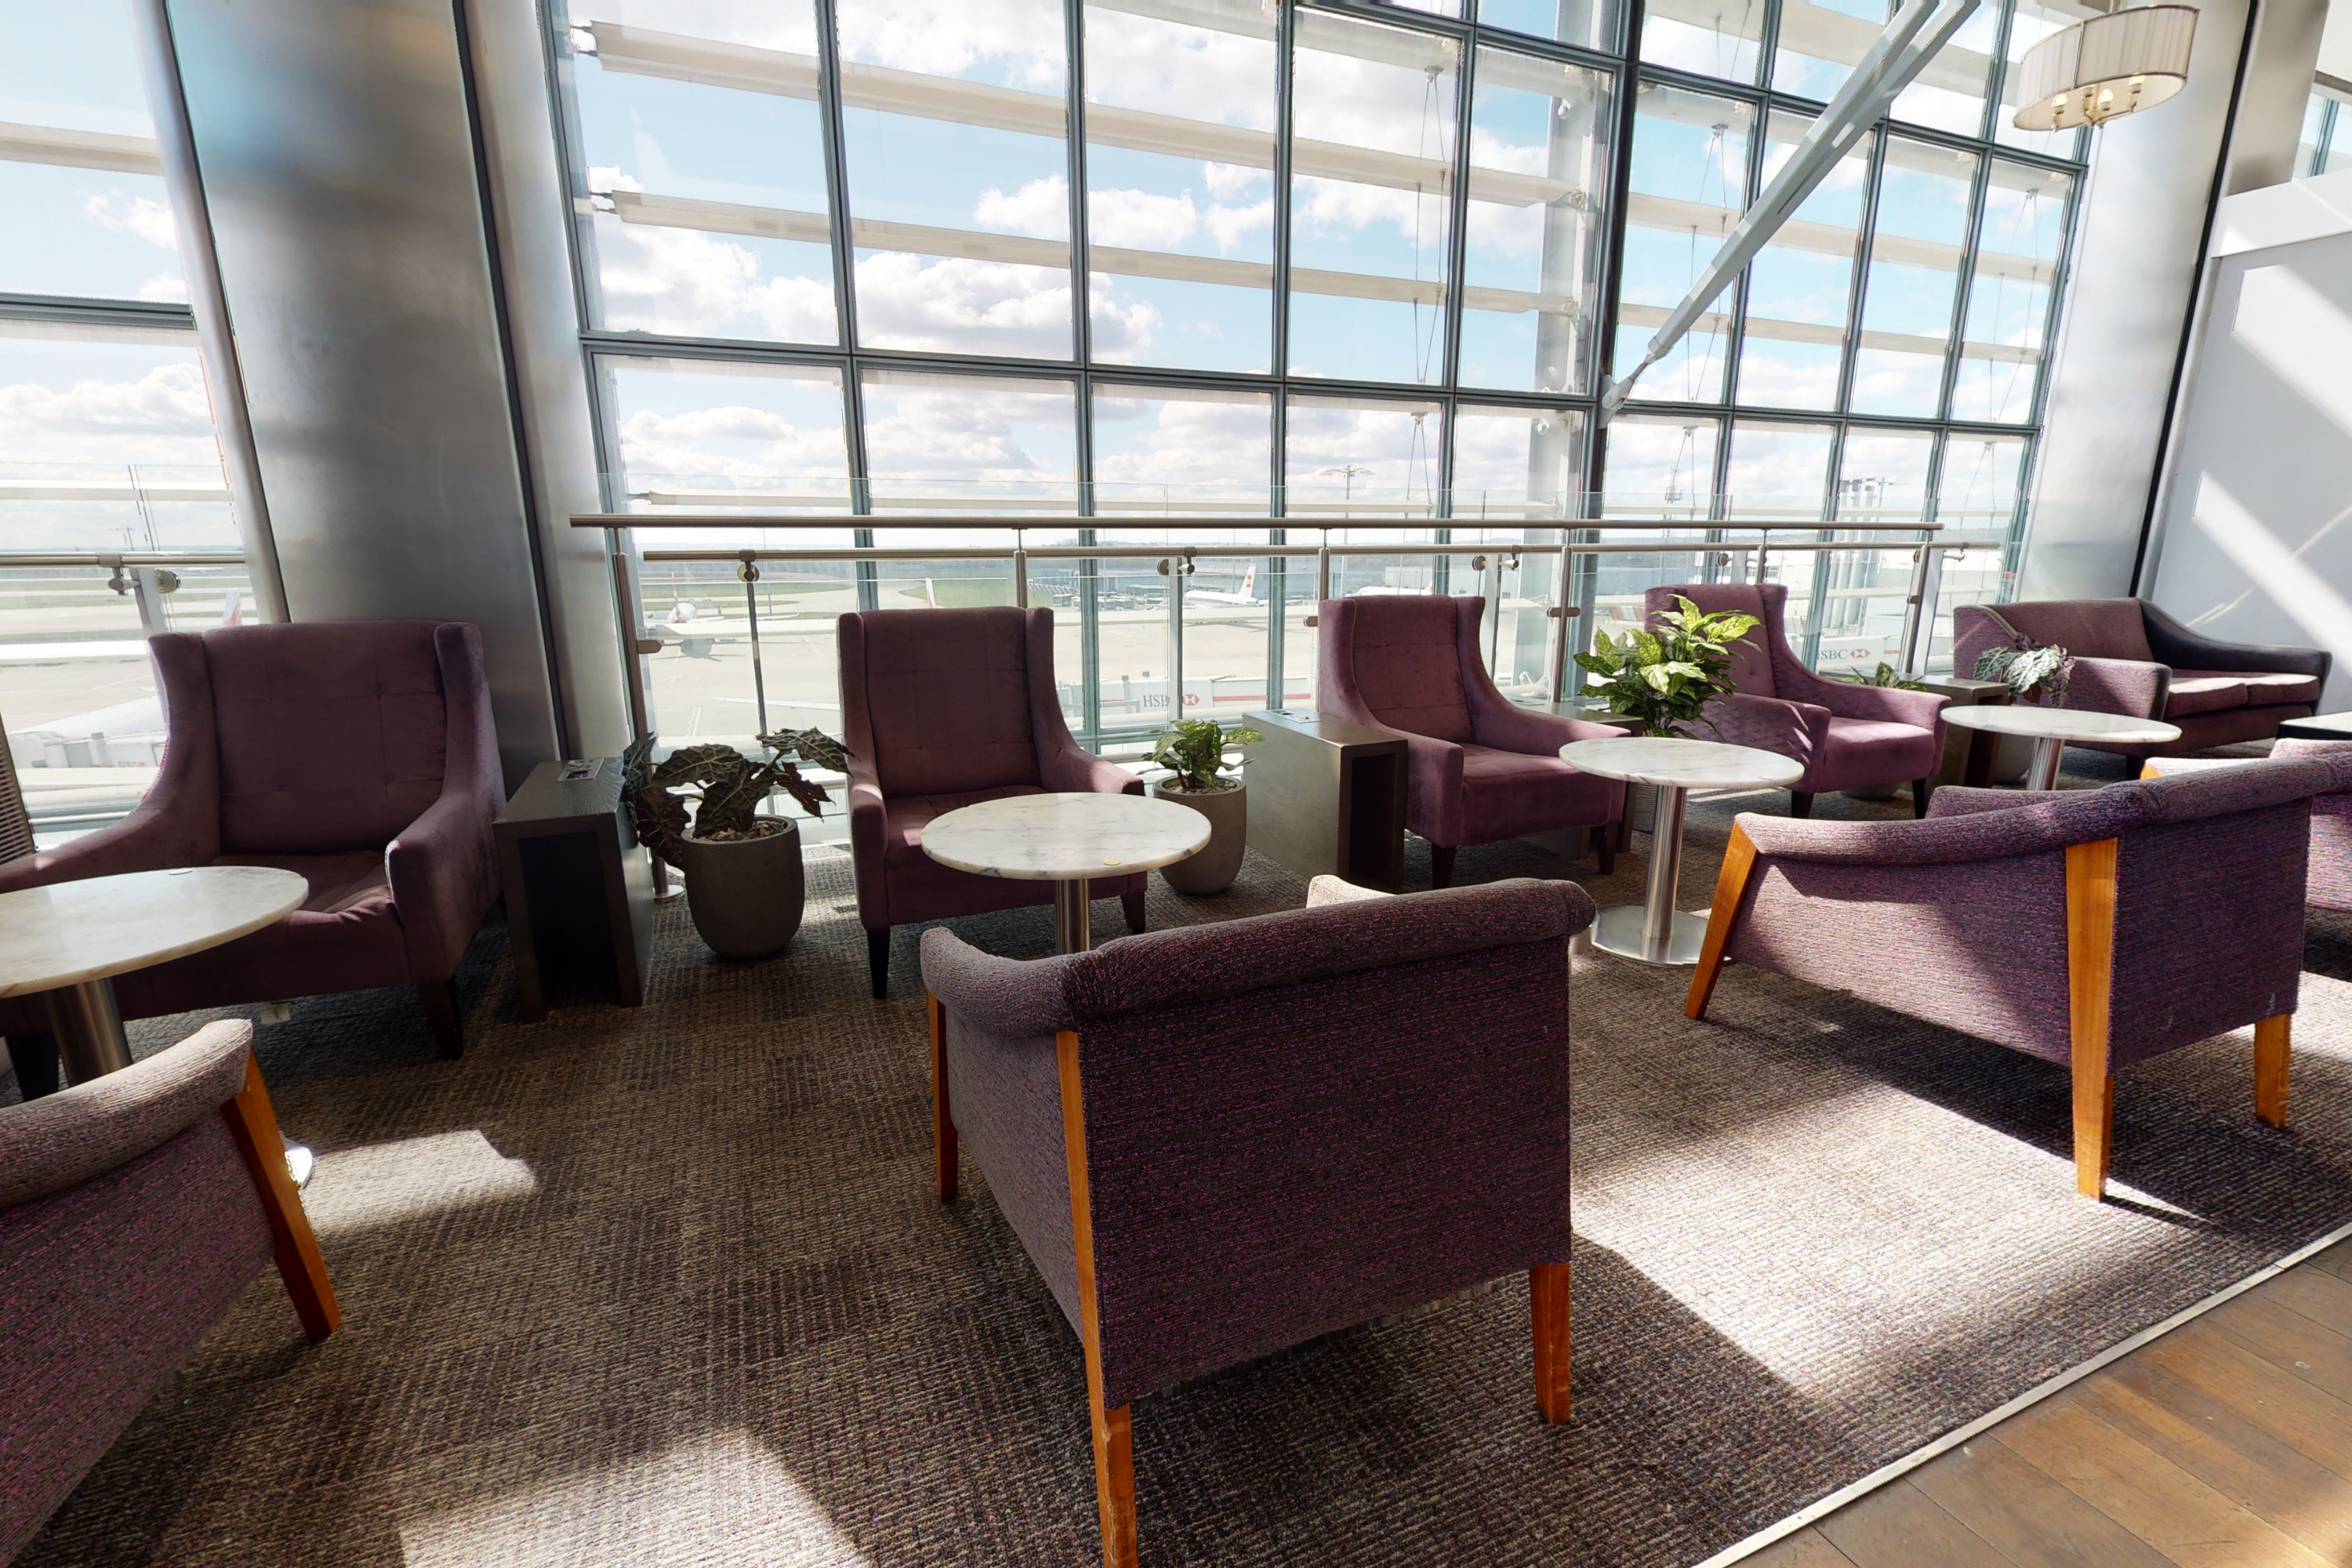 Airport Dimensions and JPMorgan Chase partner on new lounge brand: Chase Sapphire Lounge by The Club